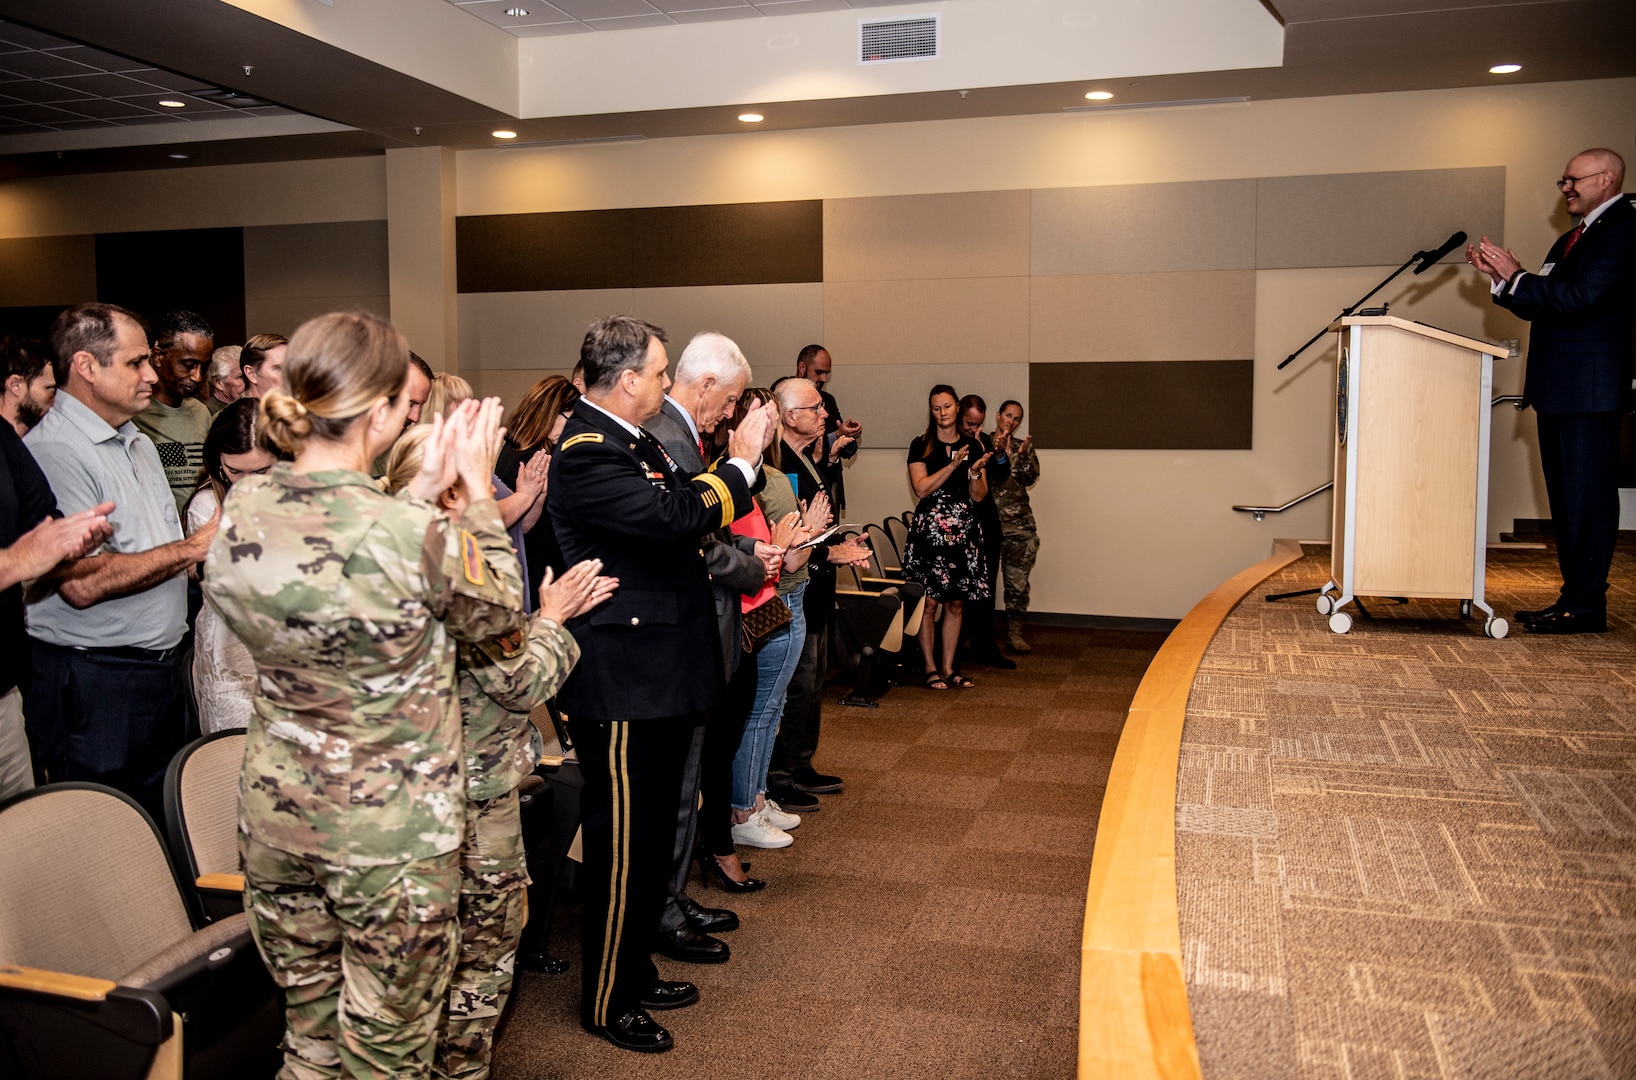 Oklahoma National Guardsmen, distinguished guest and Cameron Glass employees give Jim Cameron, Cameron Glass owner, a standing ovation at the Broken Arrow Armed Force Reserve Center, Sept. 21, 2021. Employer Support of the Guard and Reserve presents Cameron Glass with the Secretary of Defense Employer Support Freedom Award to recognize their unwavering support for Oklahoma National Guard and Reserve employees. (Oklahoma National Guard photo by Sgt. 1st. Class Mireille Merilice-Roberts)